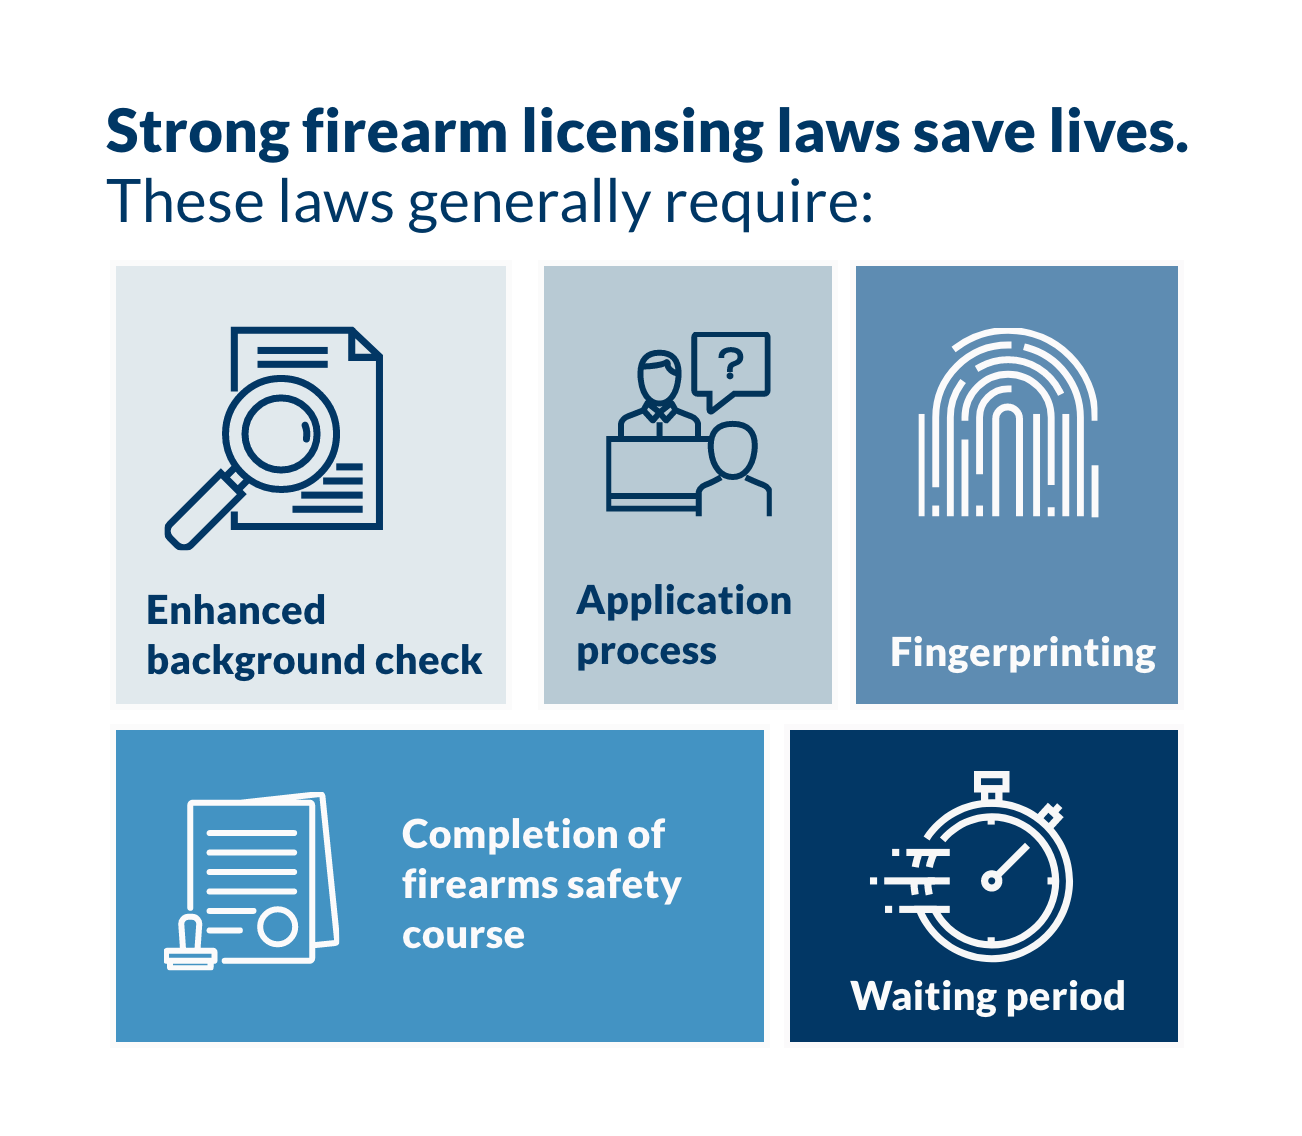 Infographic listing laws that save lives, including the requirement of: enhanced background checks, application process, fingerprinting, completion of firearms safety course, and waiting period.